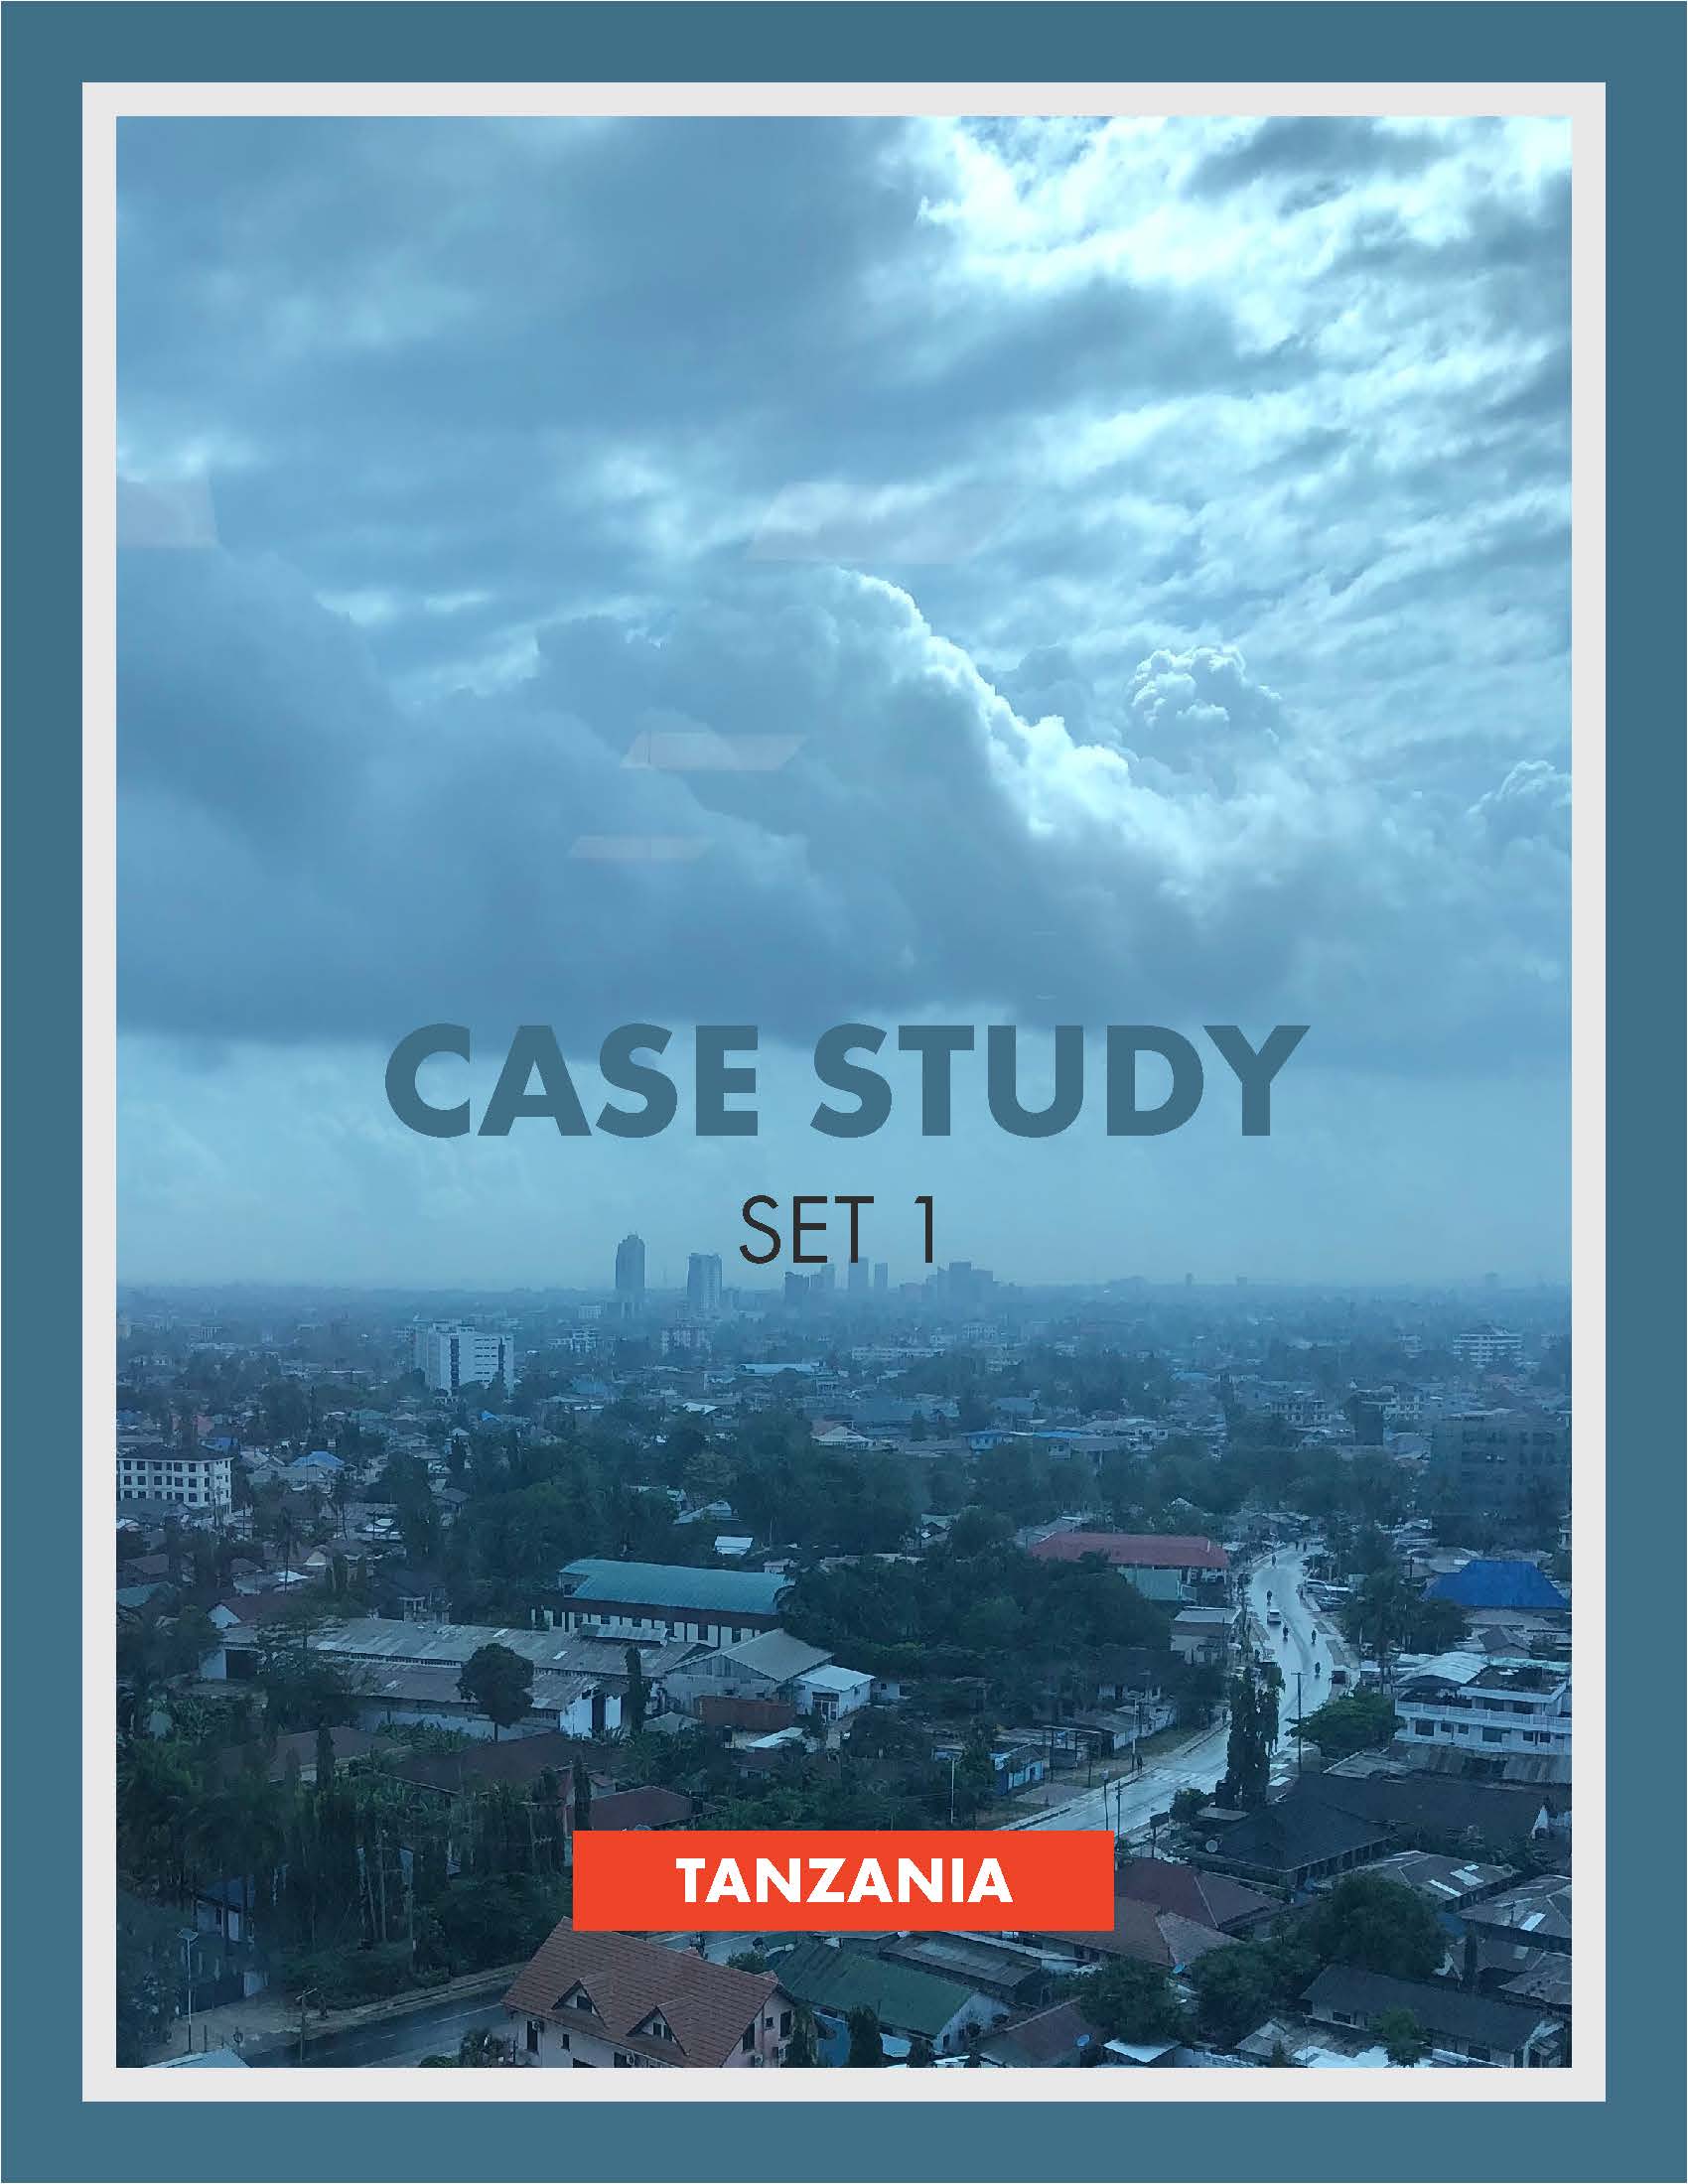 Cover of GI-ACE case studies from Tanzania